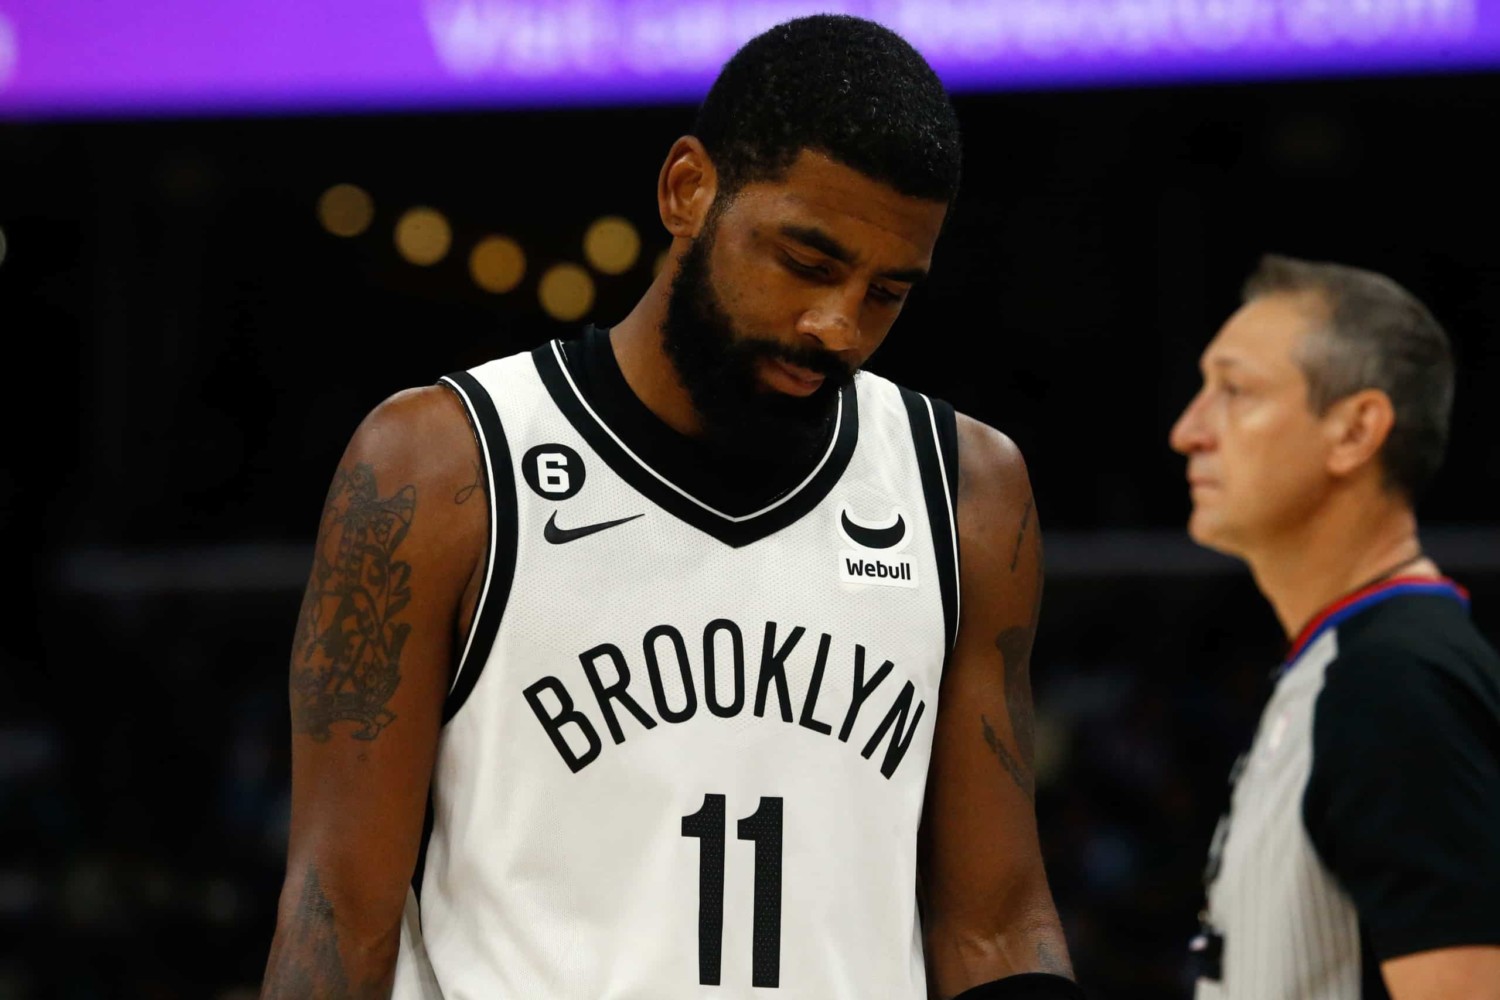 Kyrie Irving returns following suspension for antisemitism - The